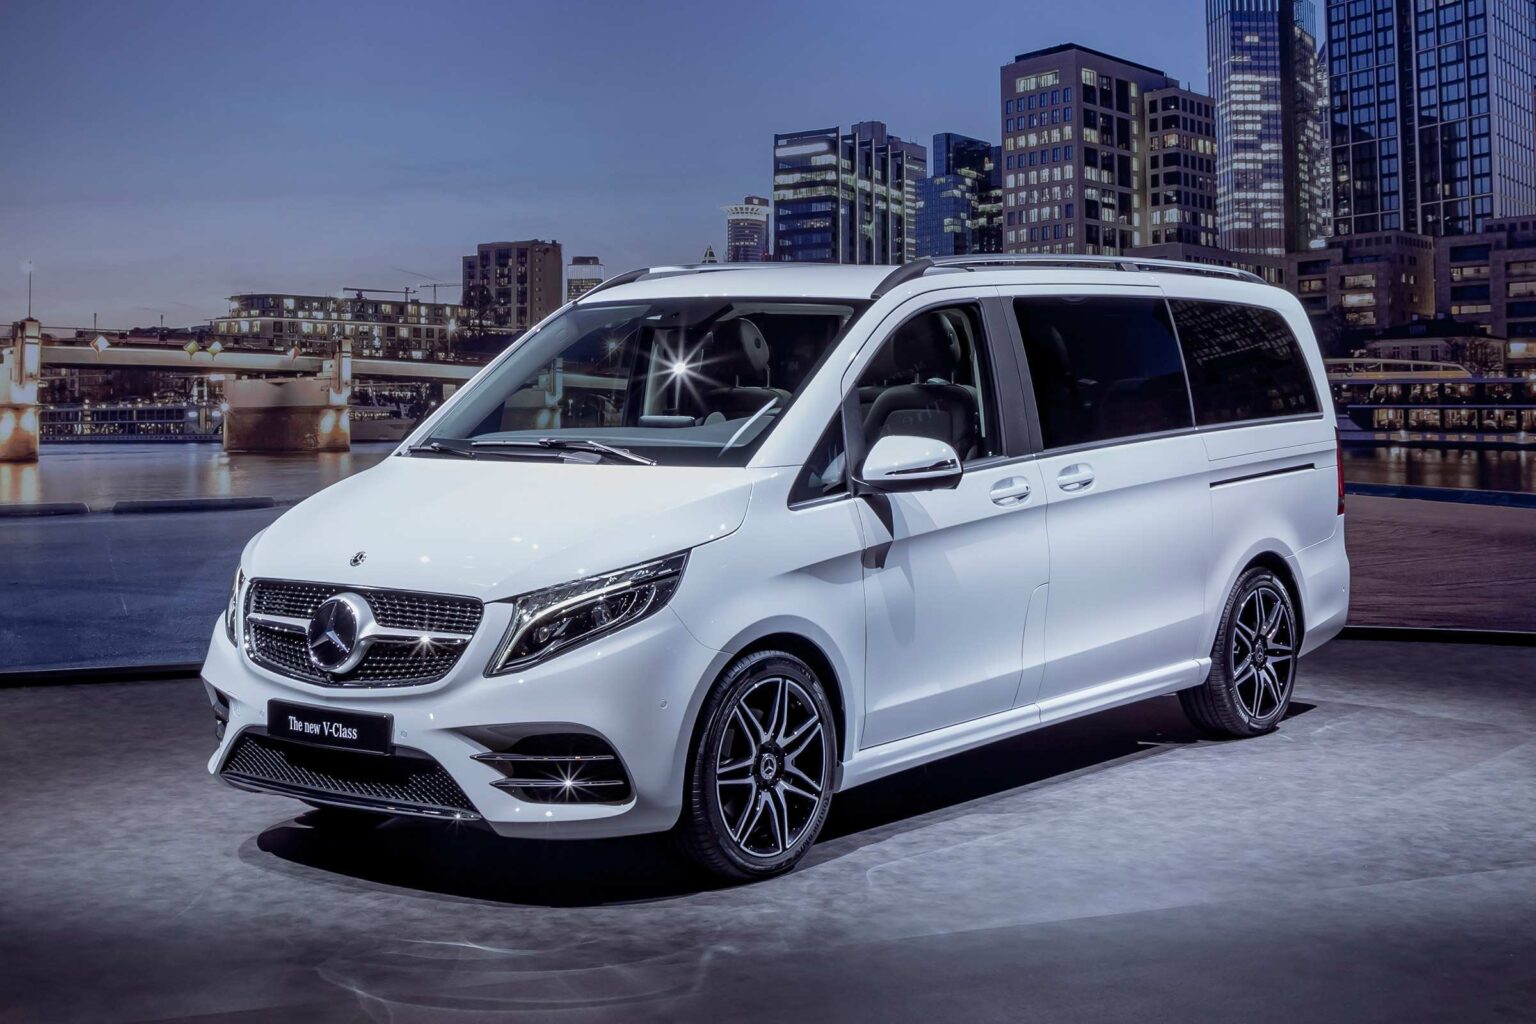 Why Choose a Mercedes V-Class for Your Next UK Trip?